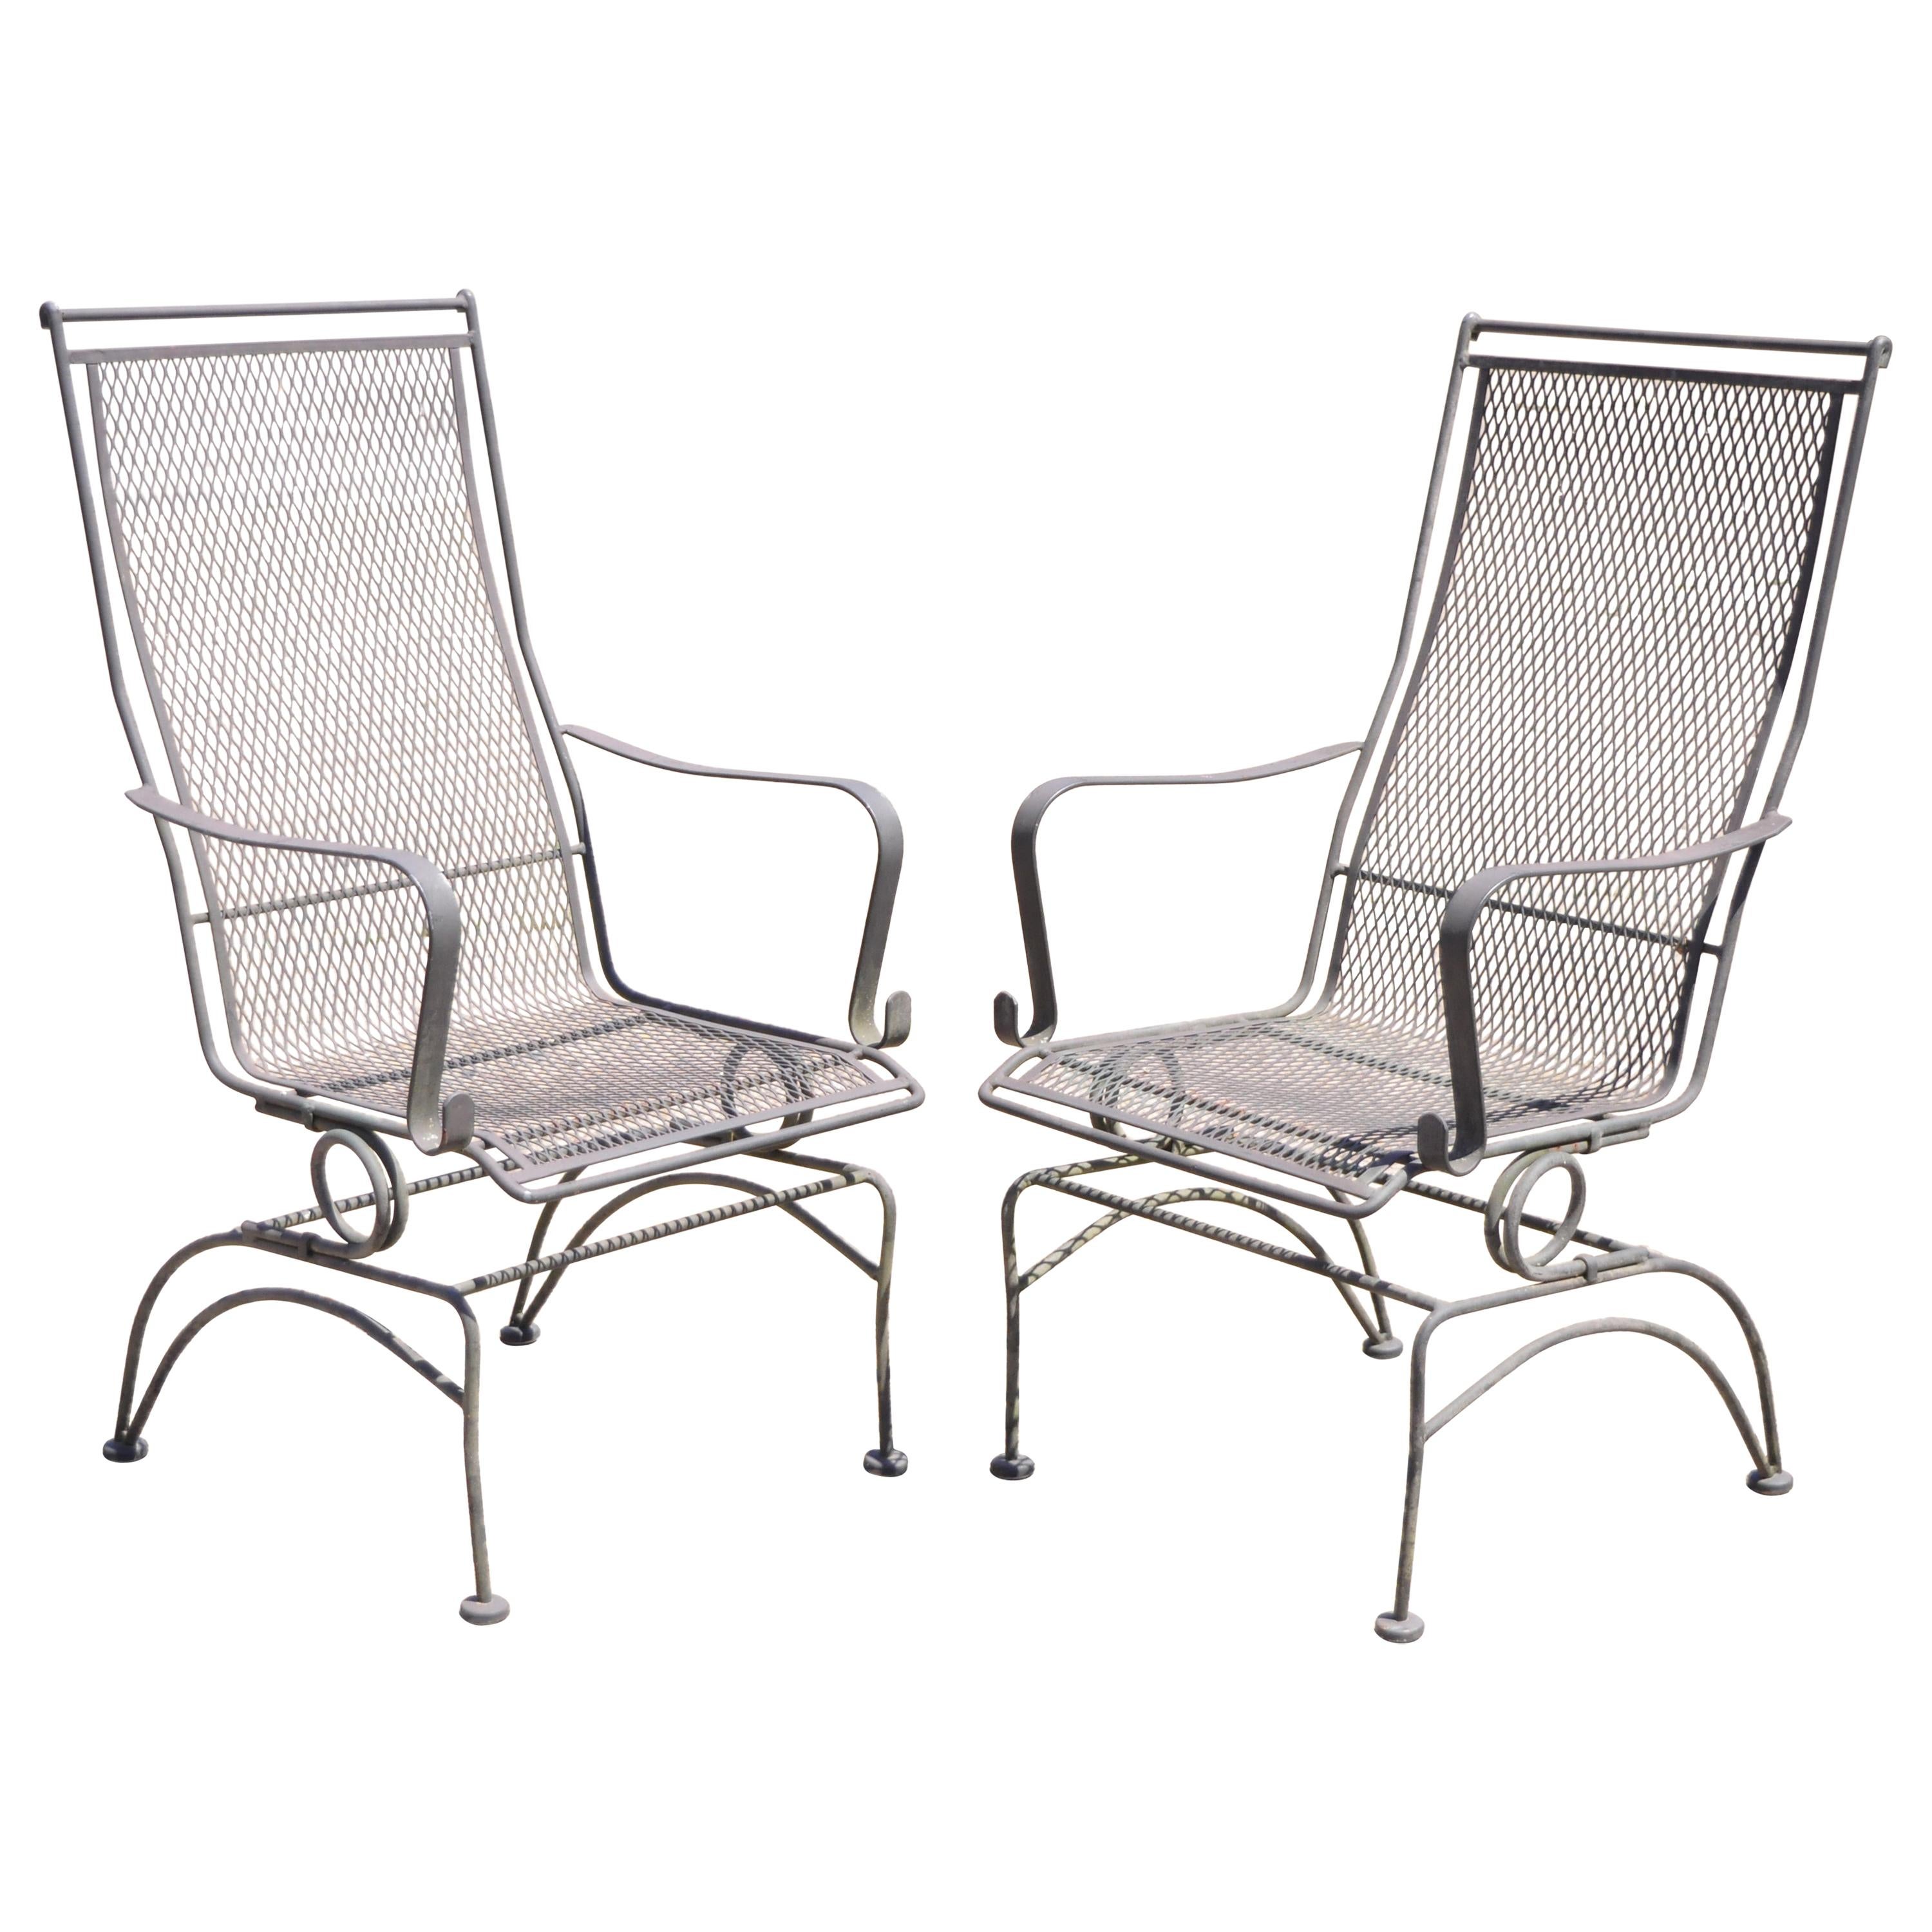 Woodard Bradford Collection Spring High Back Wrought Iron Patio Chairs, a Pair